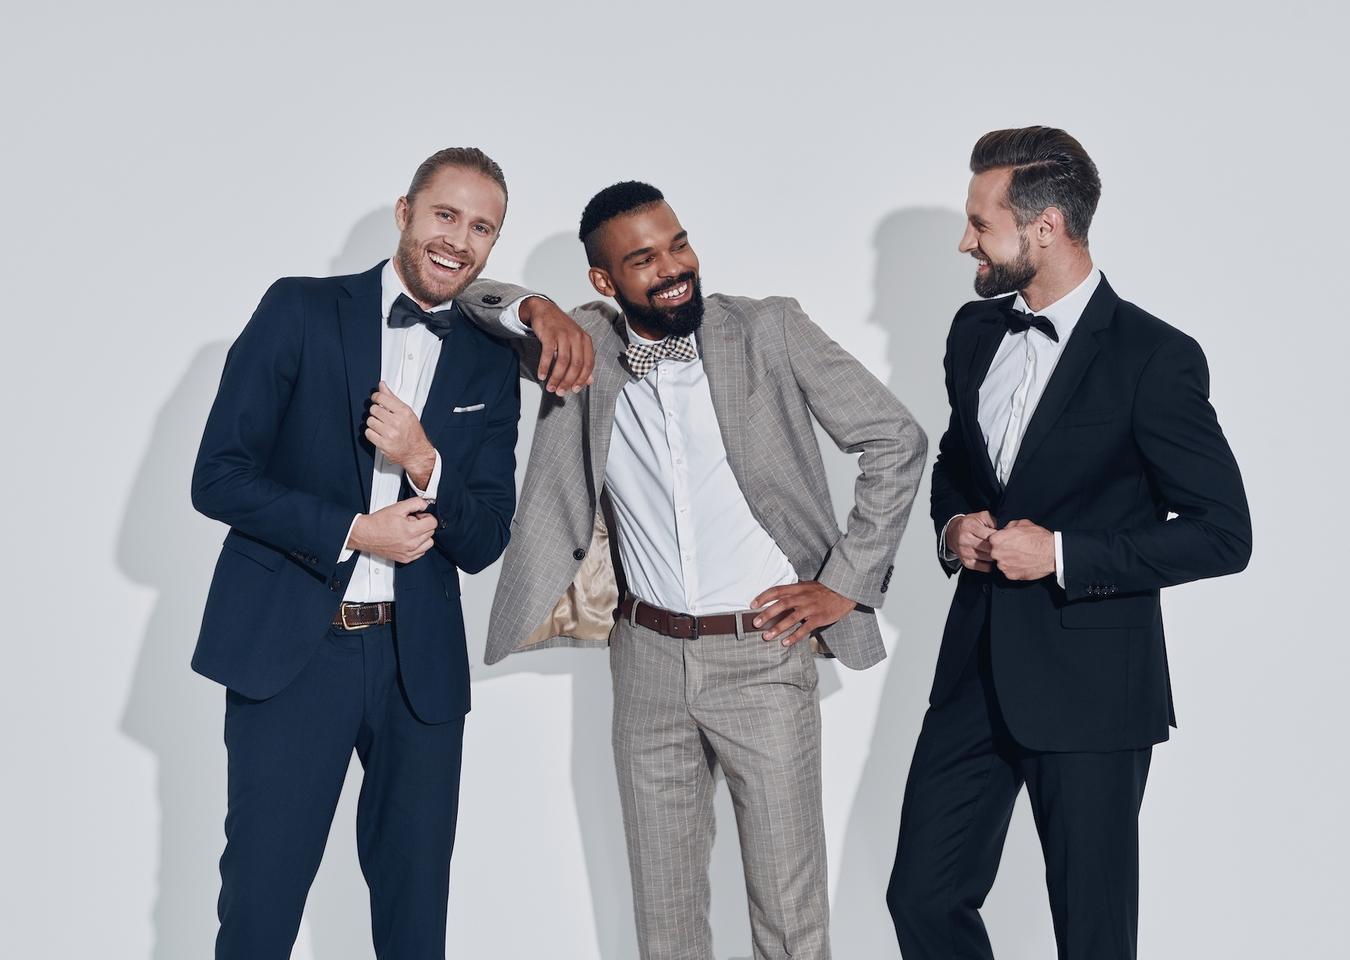 The Men's Style Instagram Pose That Must Be Stopped | GQ